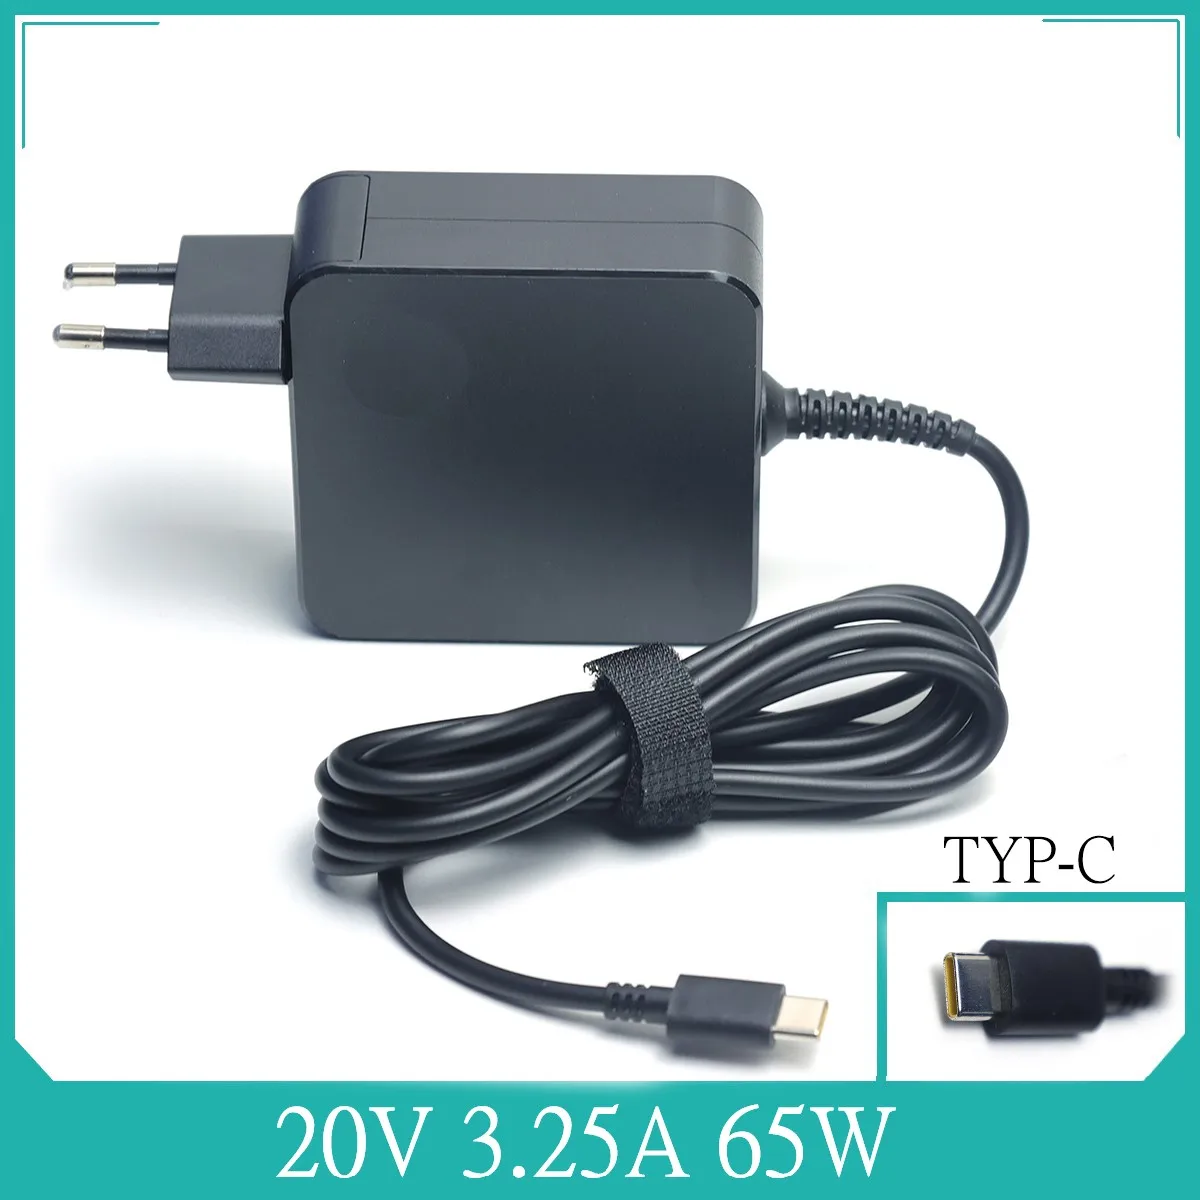 

For Thinkpad Lenovo E480 E485 Charger Type-C USB-C Power Adapter 20V 3.25A 65W TYP-C